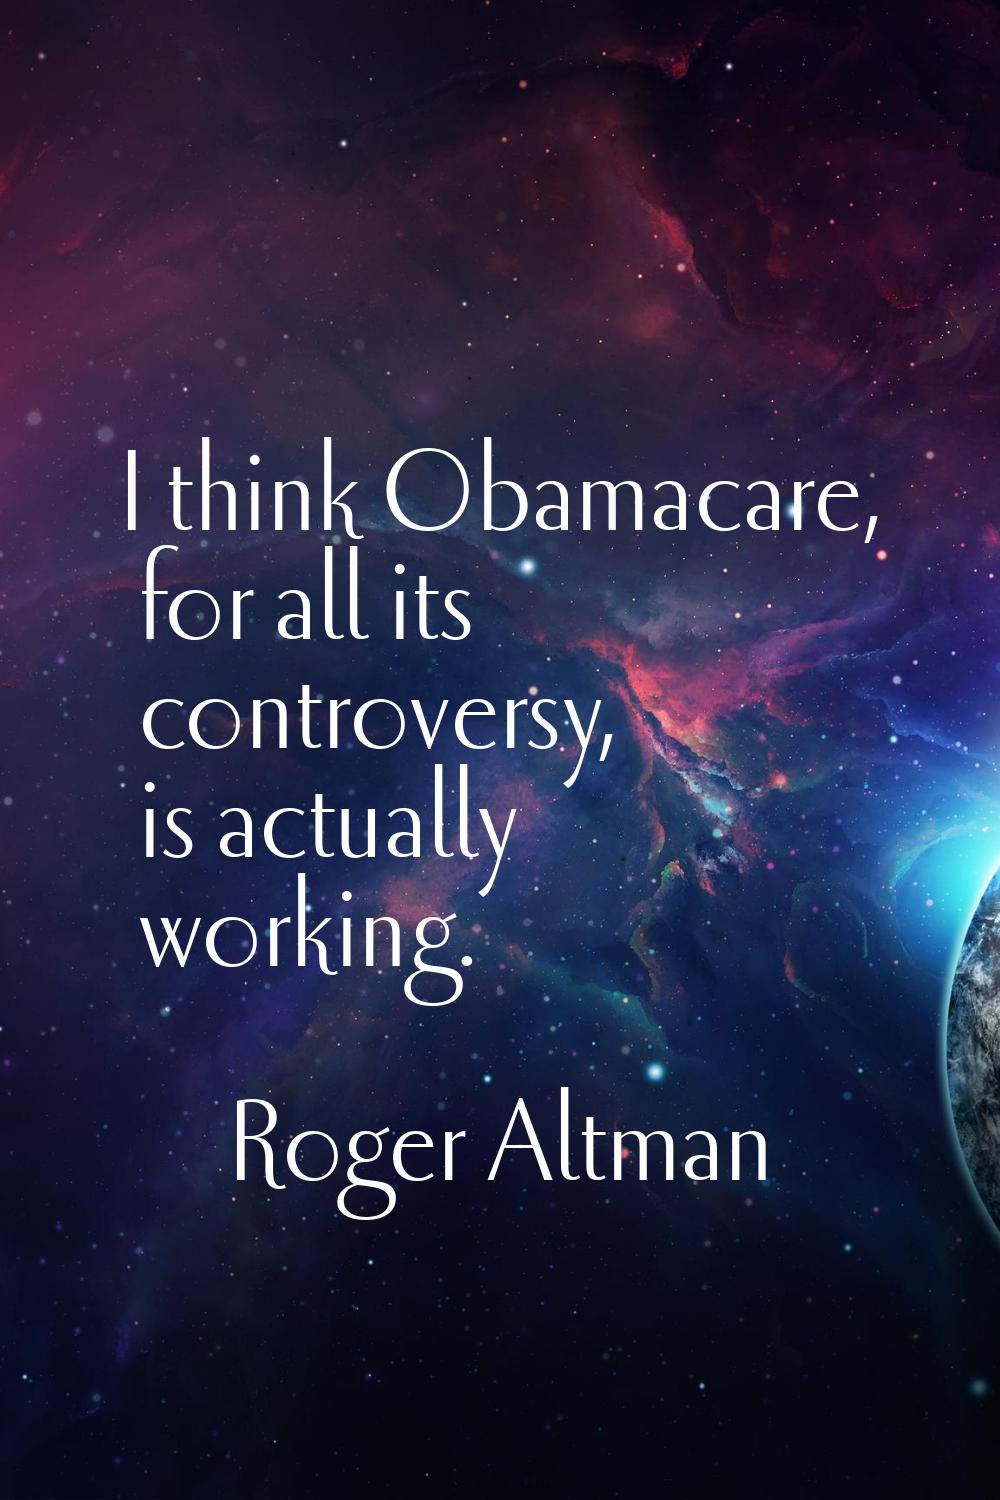 I think Obamacare, for all its controversy, is actually working.